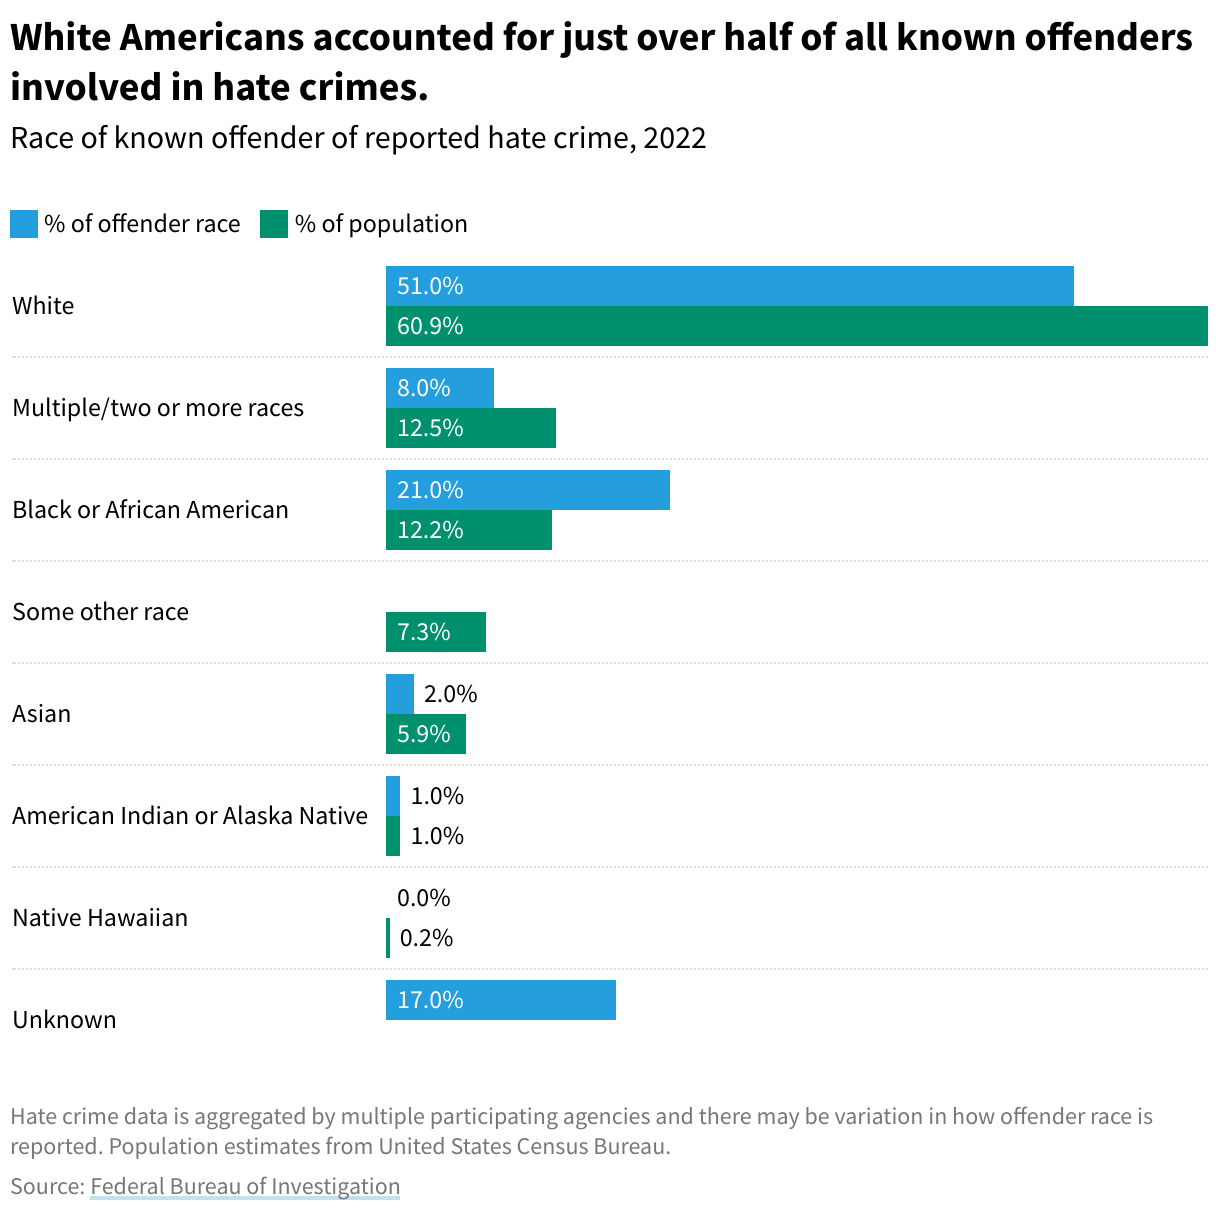 A split bar chart showing the comparison of the race of hate crime offenders versus the percent of that race in the US population. 